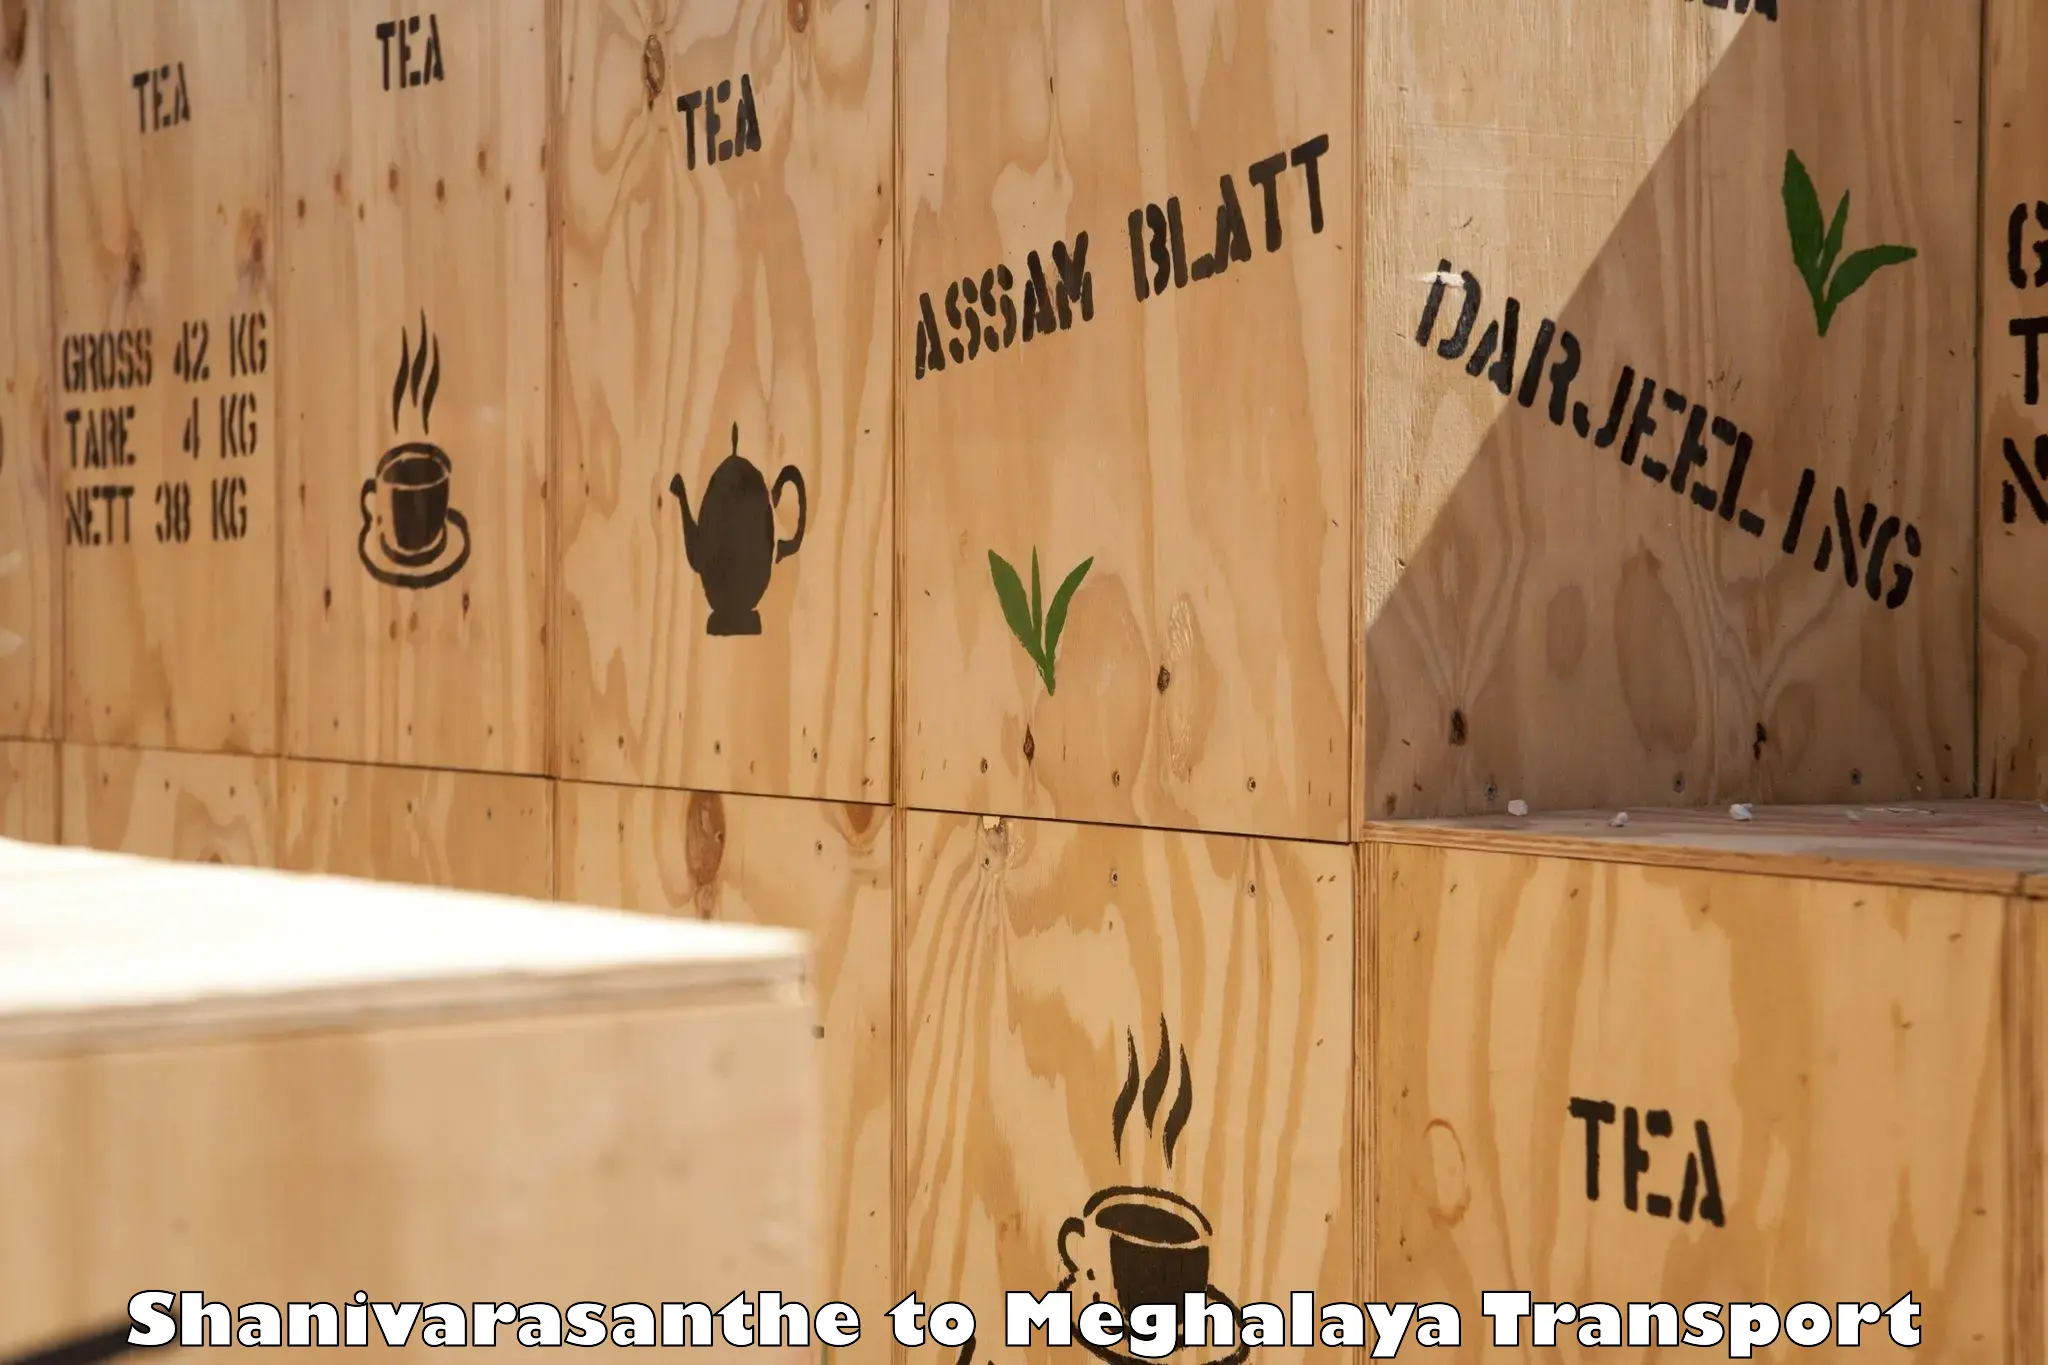 Container transport service Shanivarasanthe to Shillong